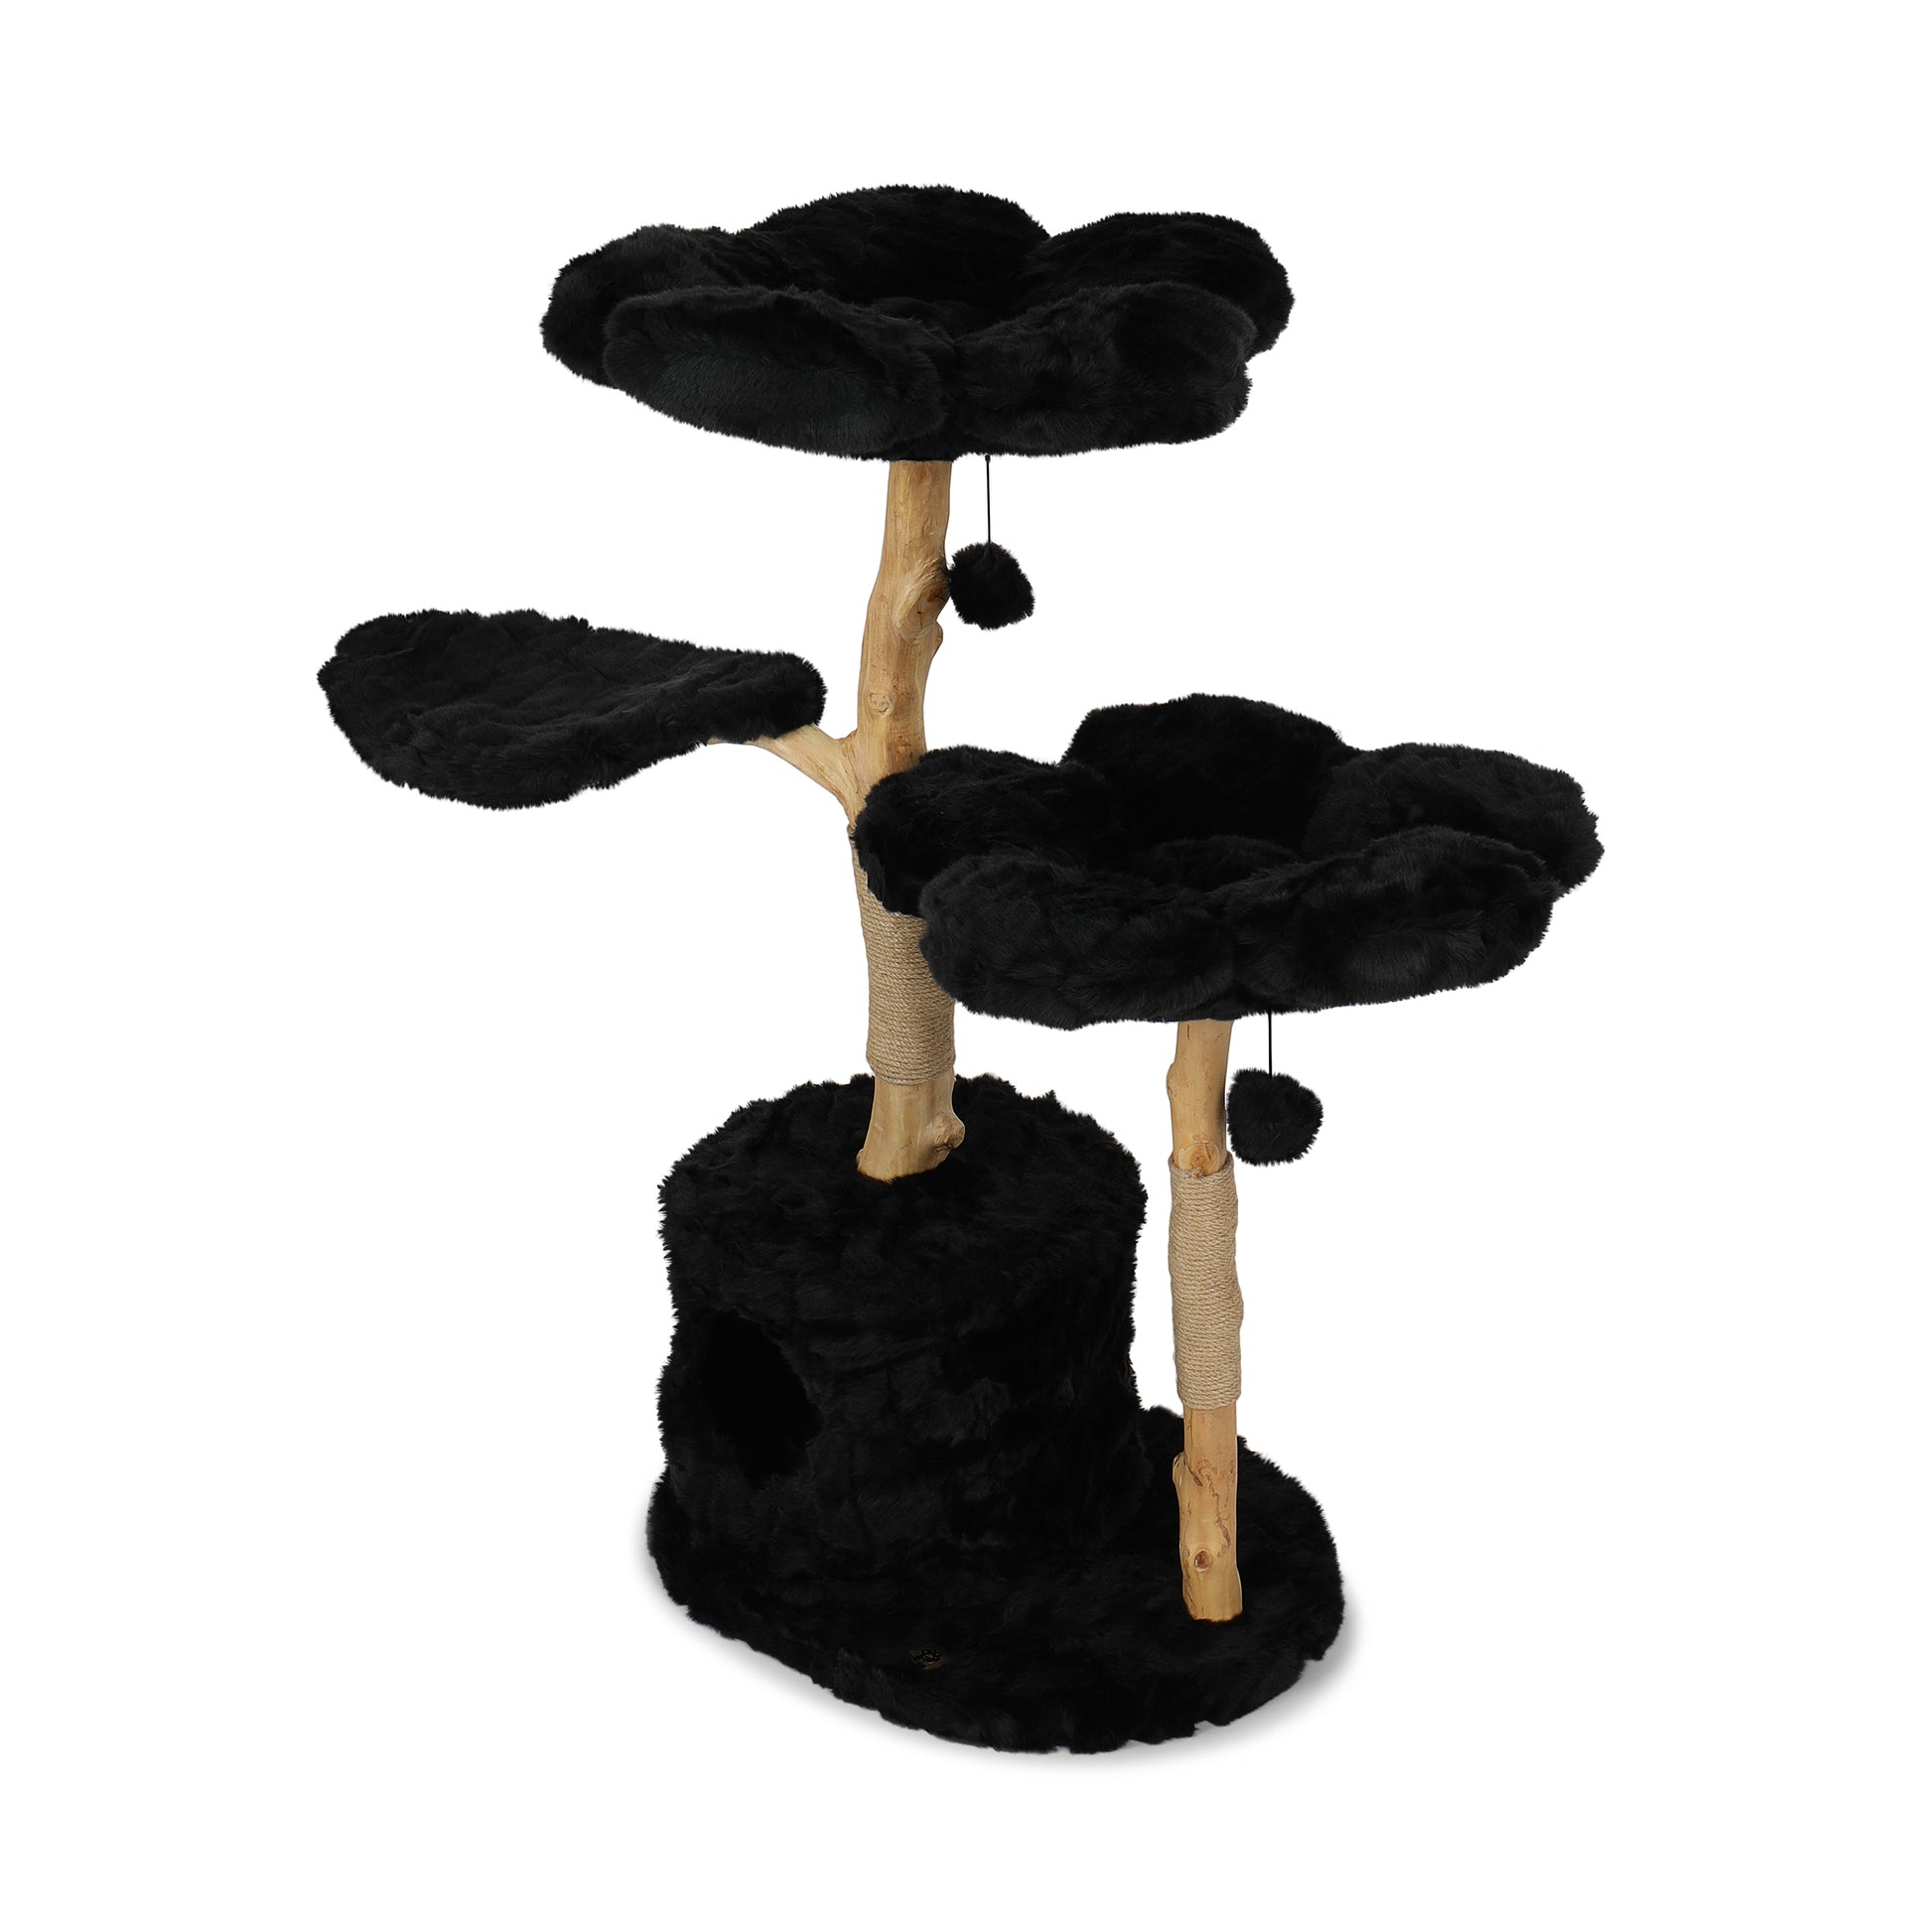 Stylish floral cat tree with black flowers, providing a cozy perch for cats